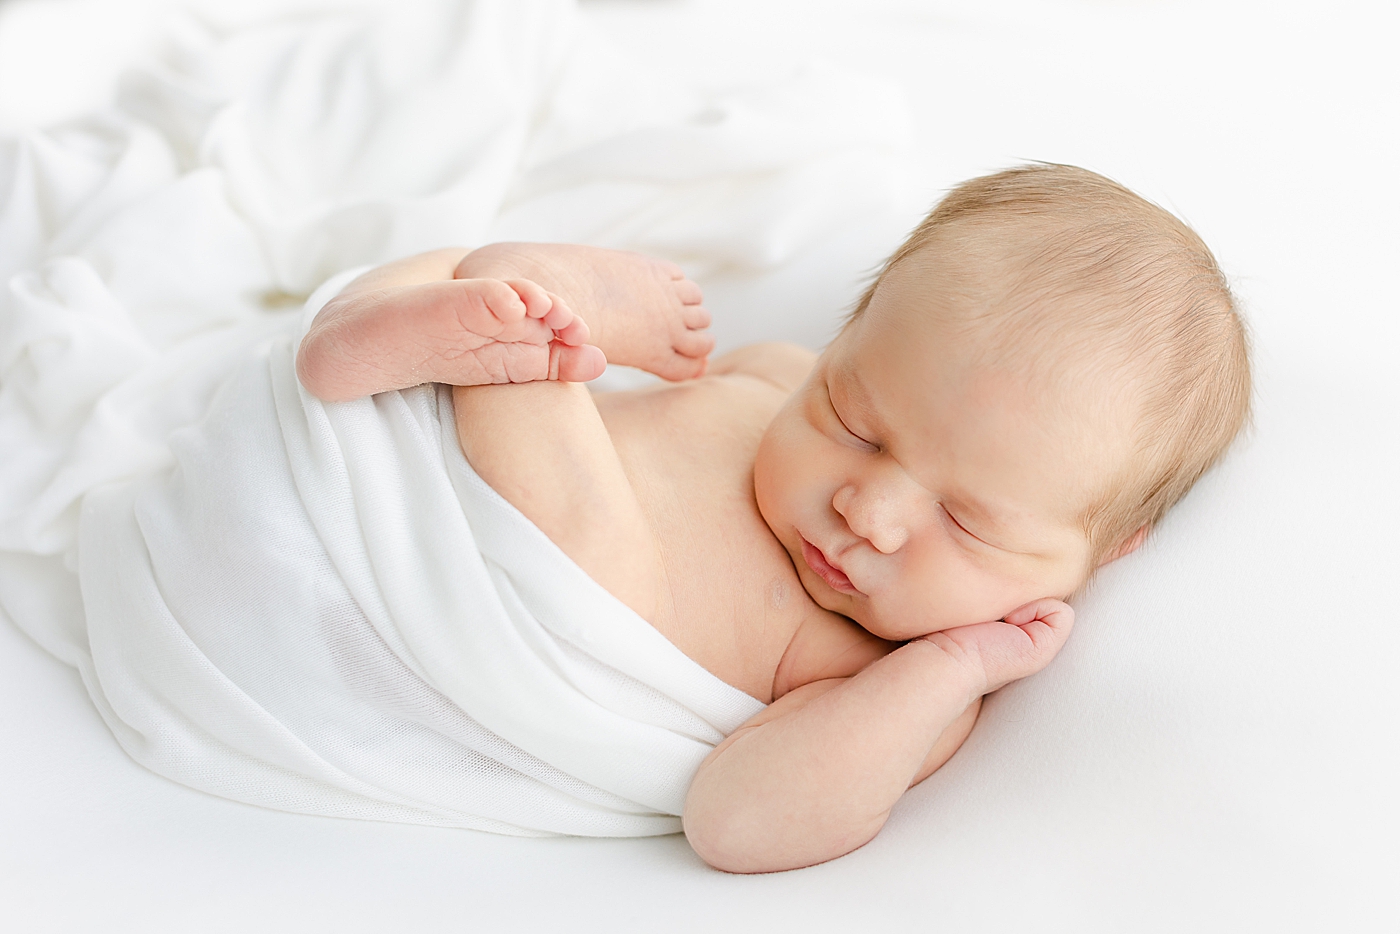 Newborn baby boy sleeping while wrapped in a white swaddle | Image by Sana Ahmed Photography 